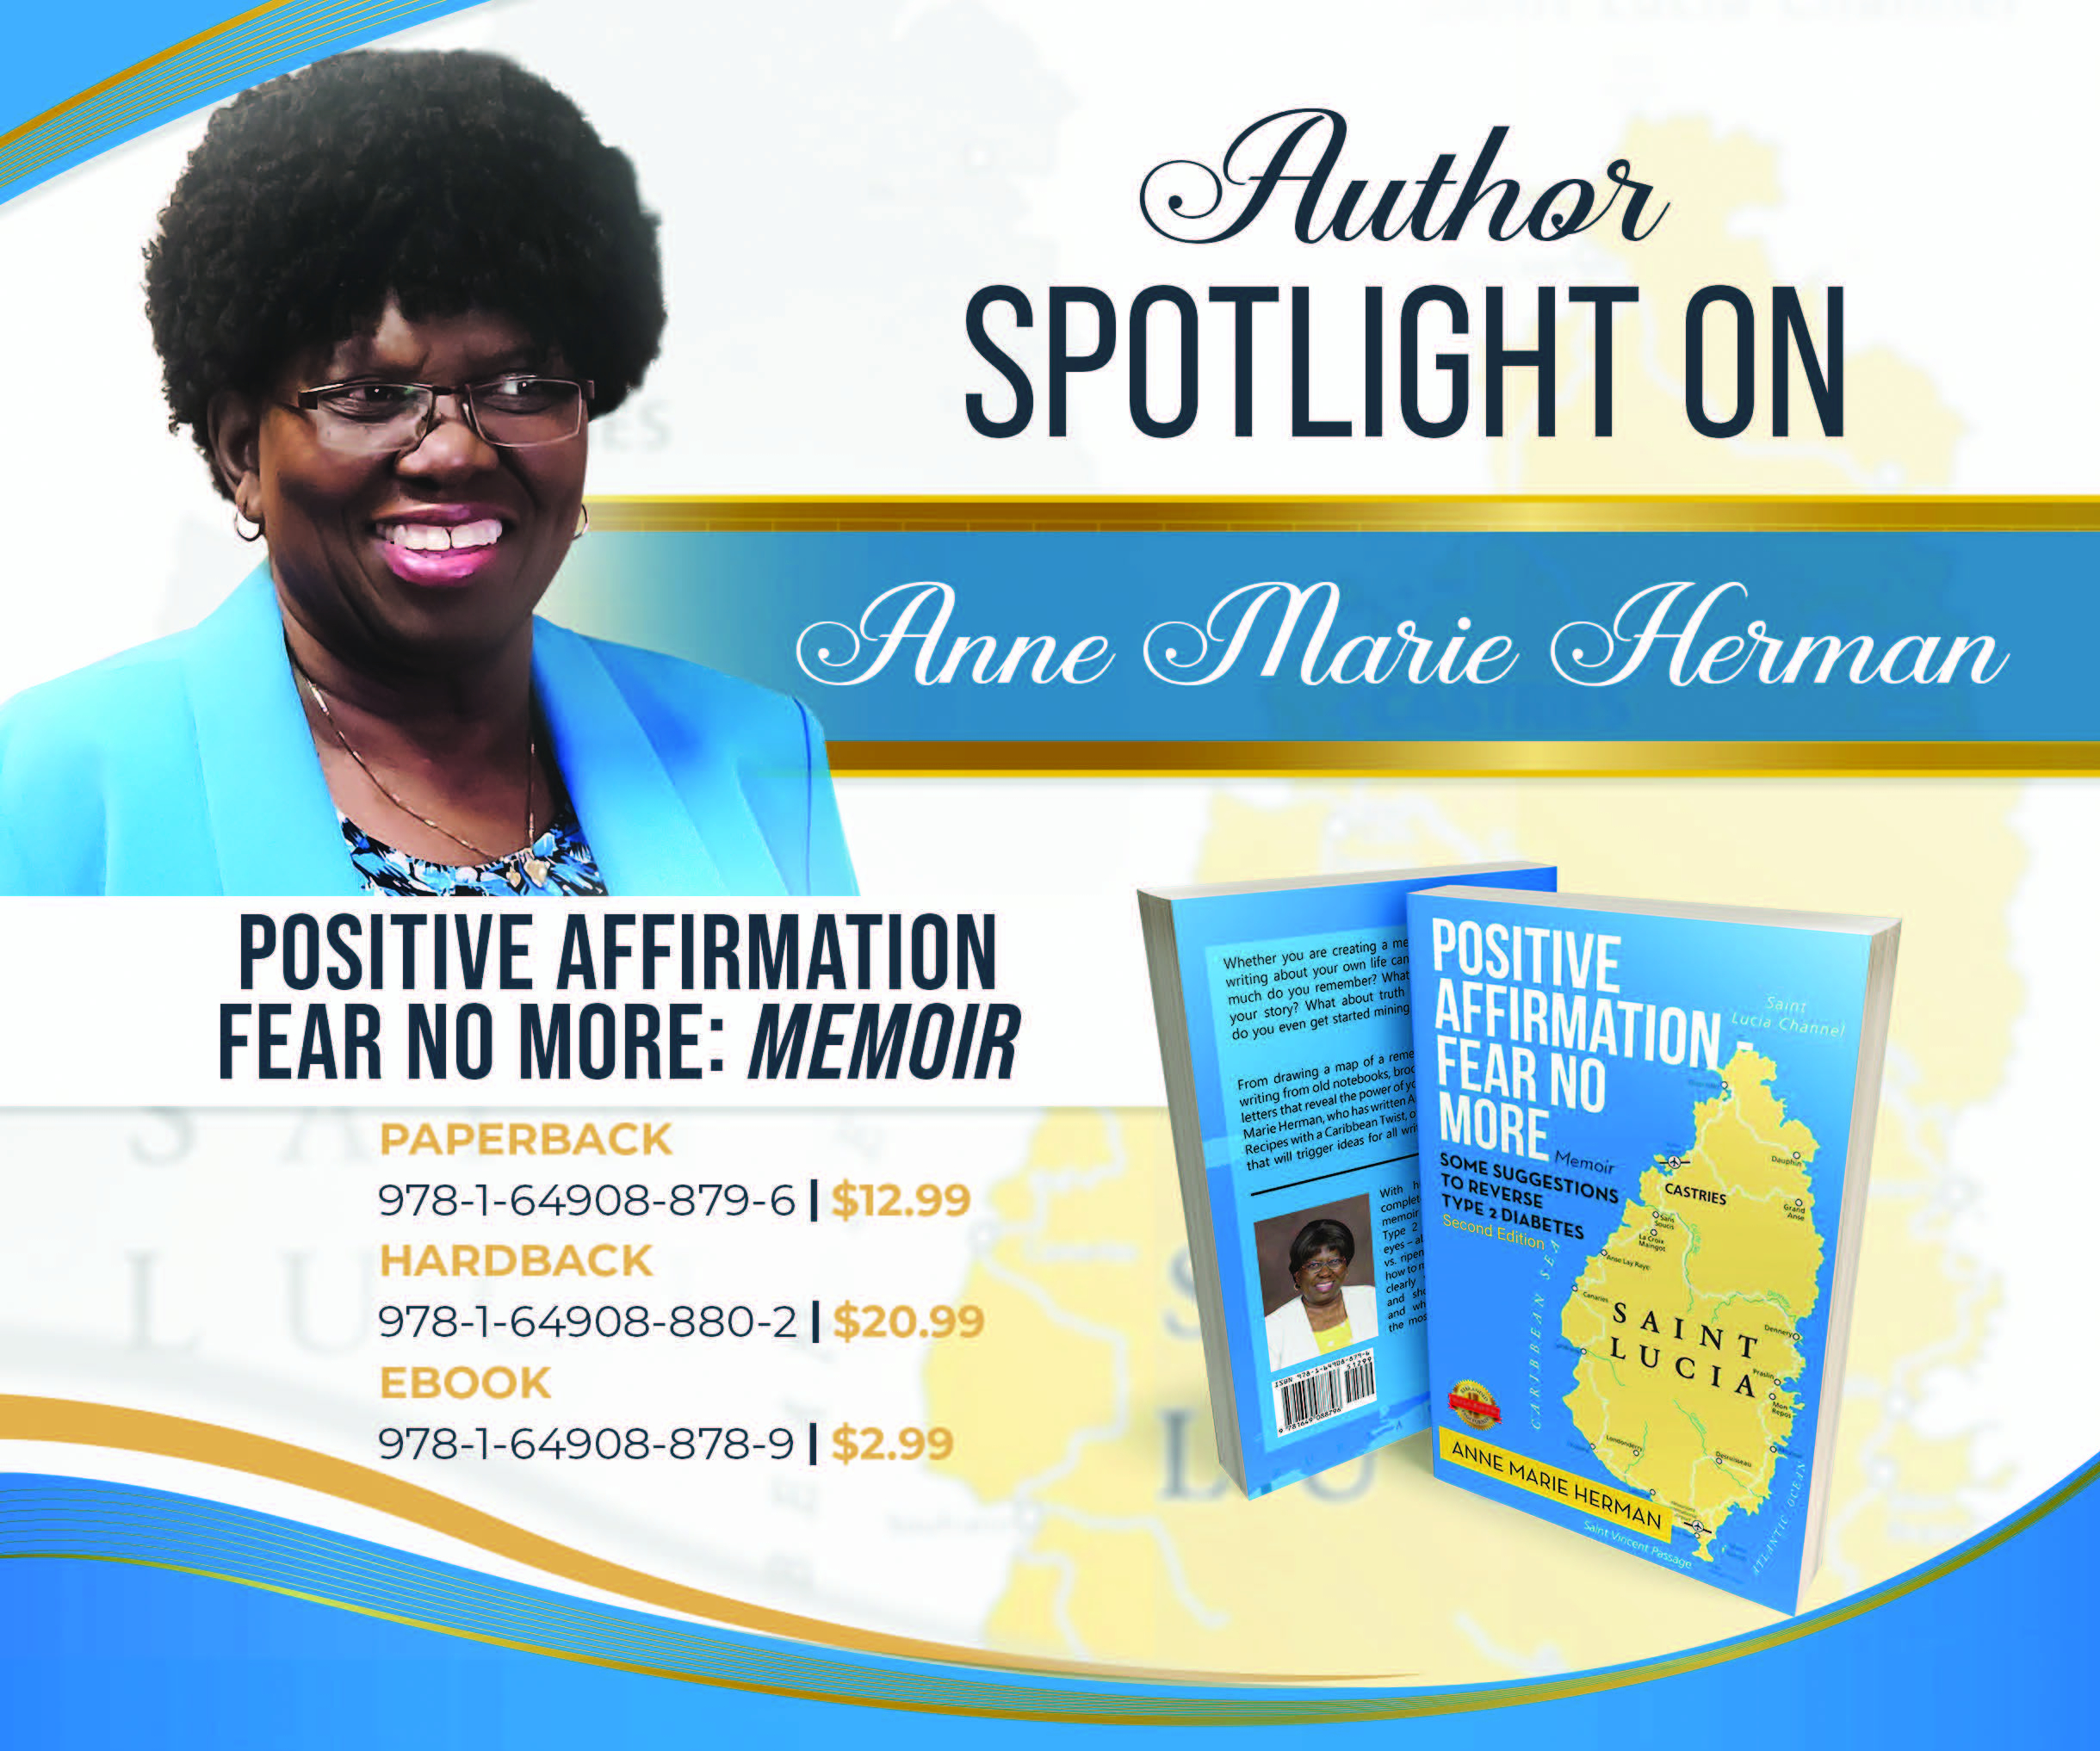 Author Anne Marie Herman featured by PageTurner Press and Media's author spotlight.